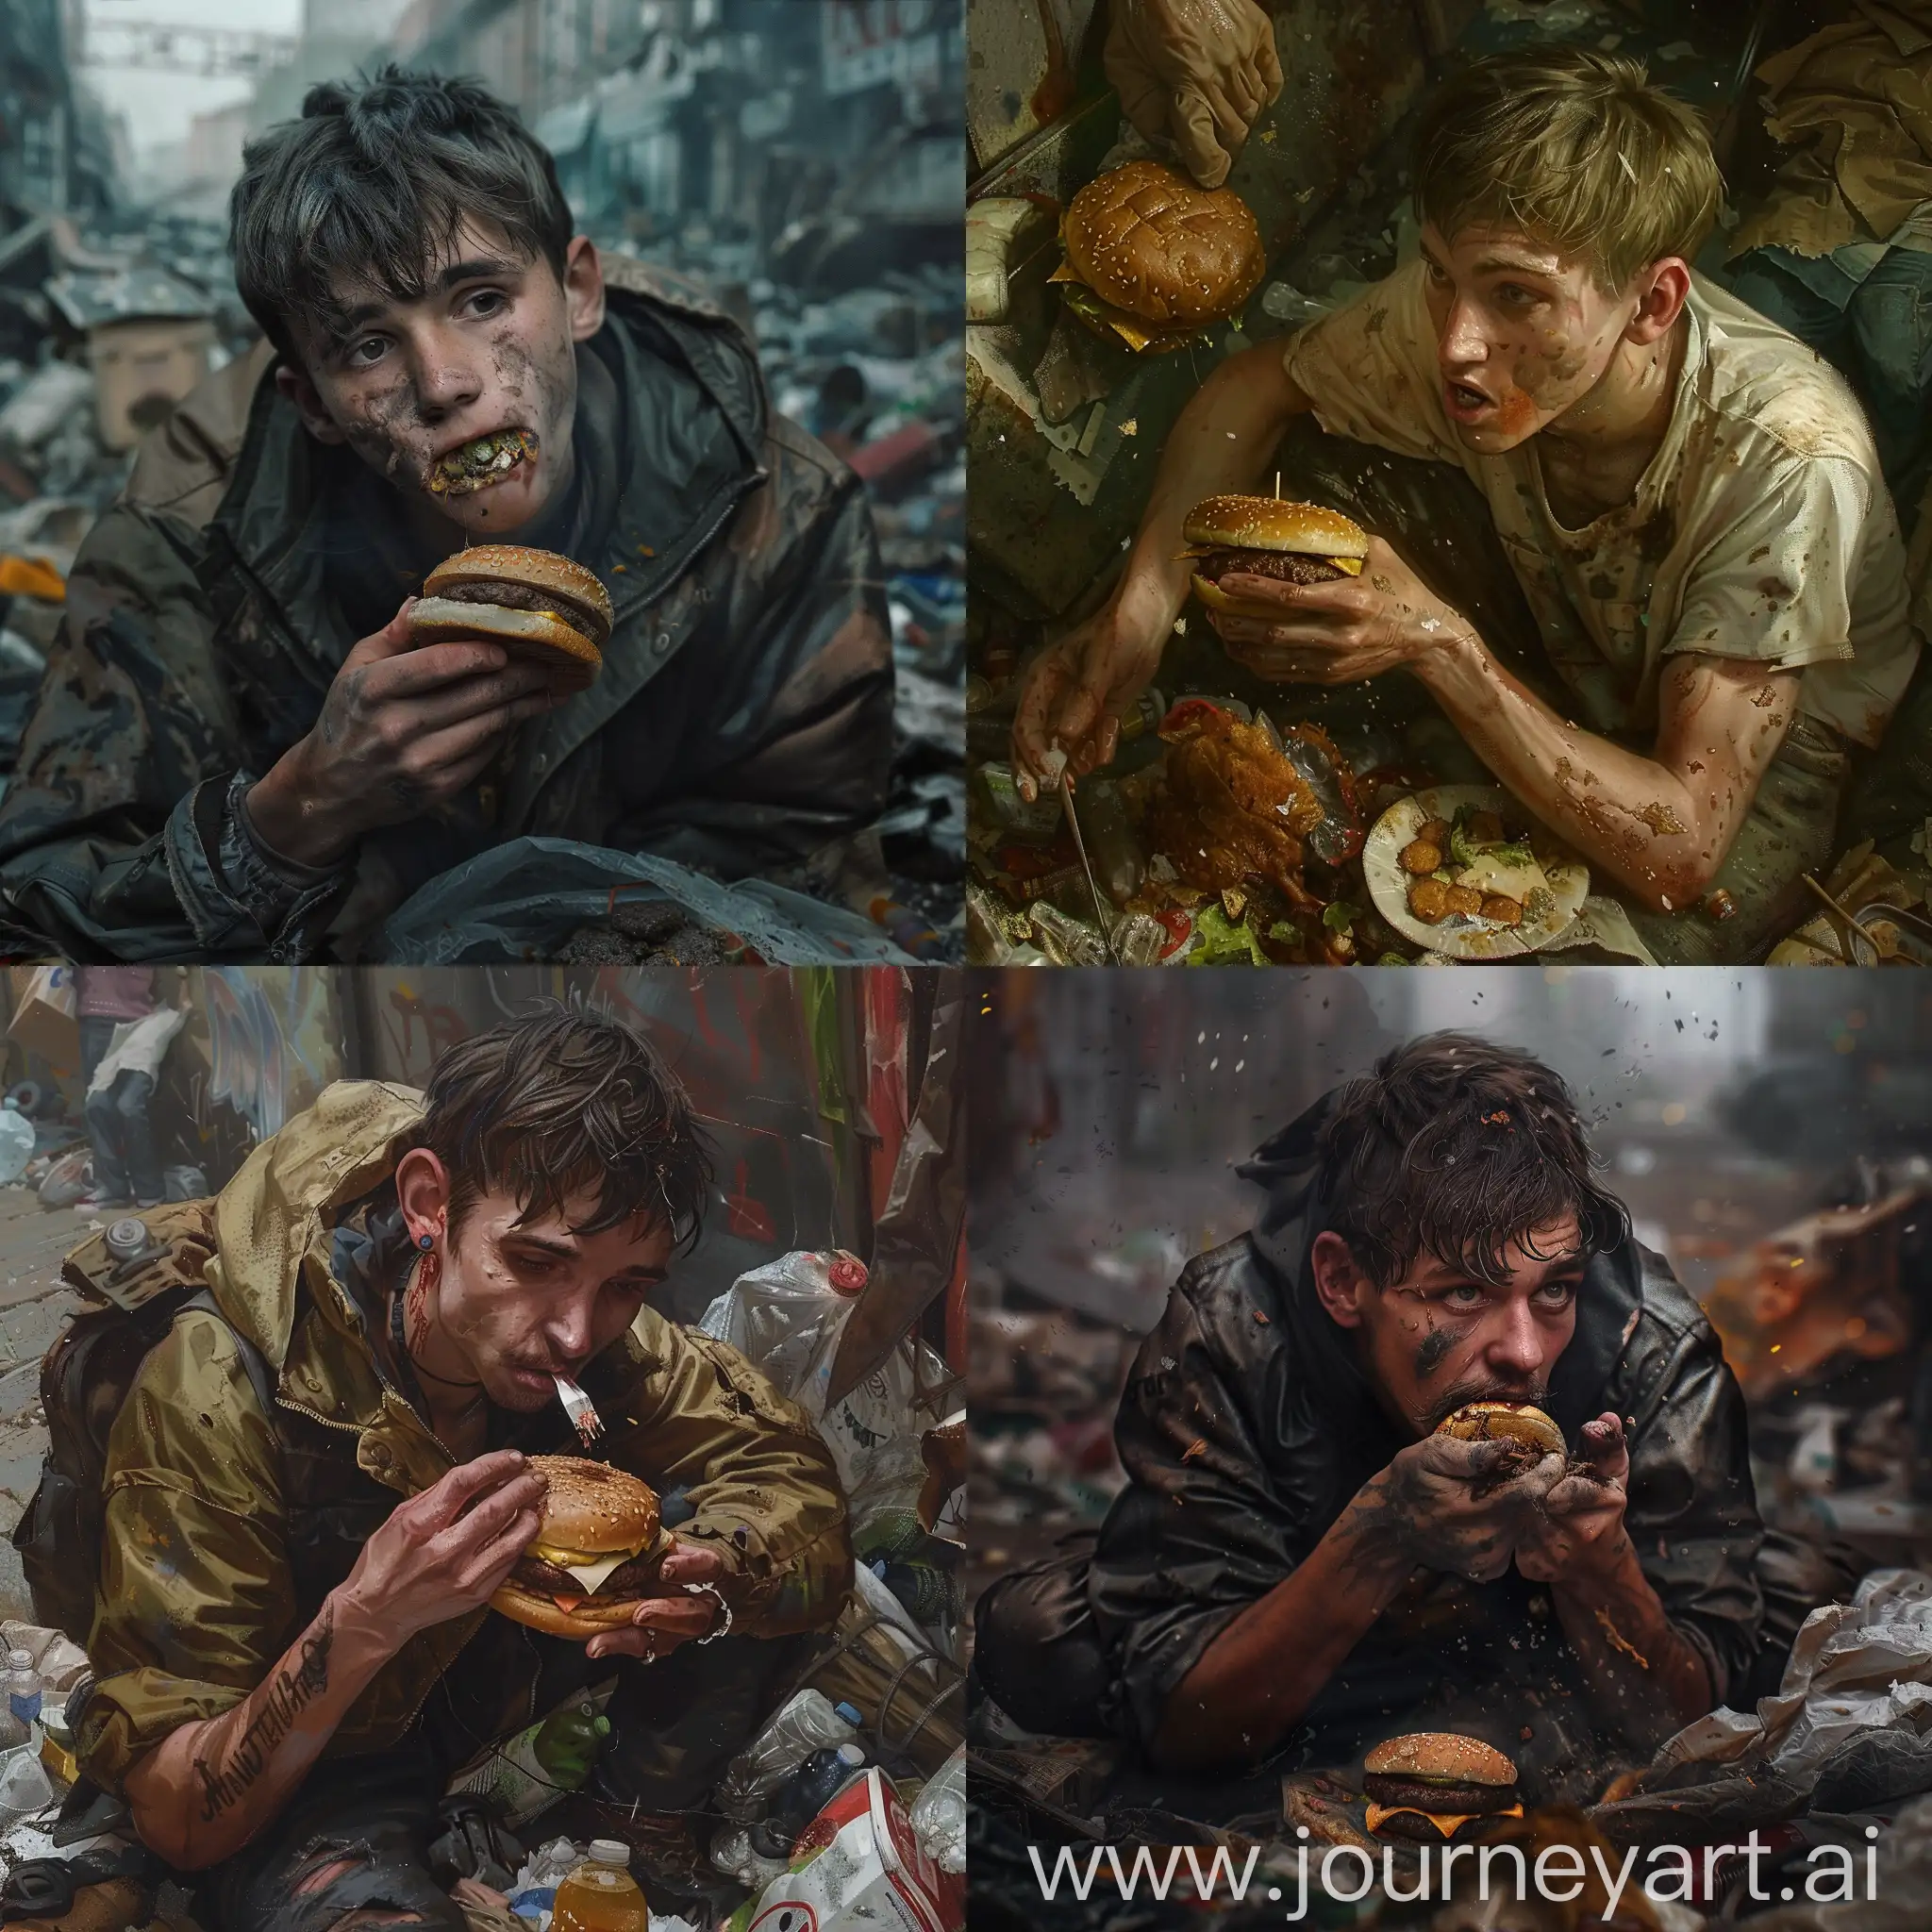 Impoverished-Young-Man-Eating-Hamburger-from-Trash-in-Russia